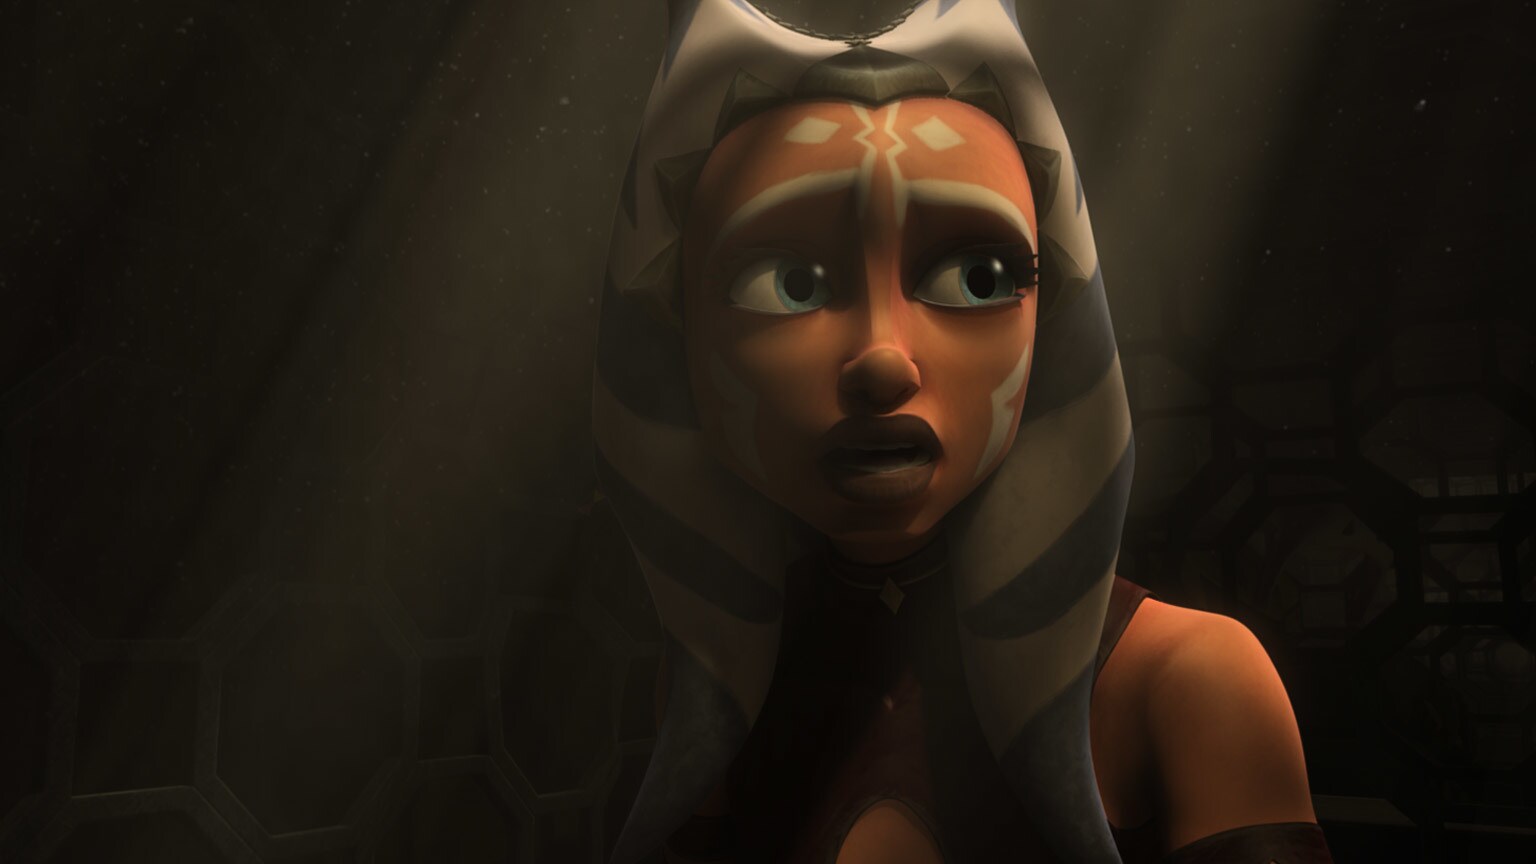 The Clone Wars Rewatch: A "Padawan Lost" Must Fight to Survive